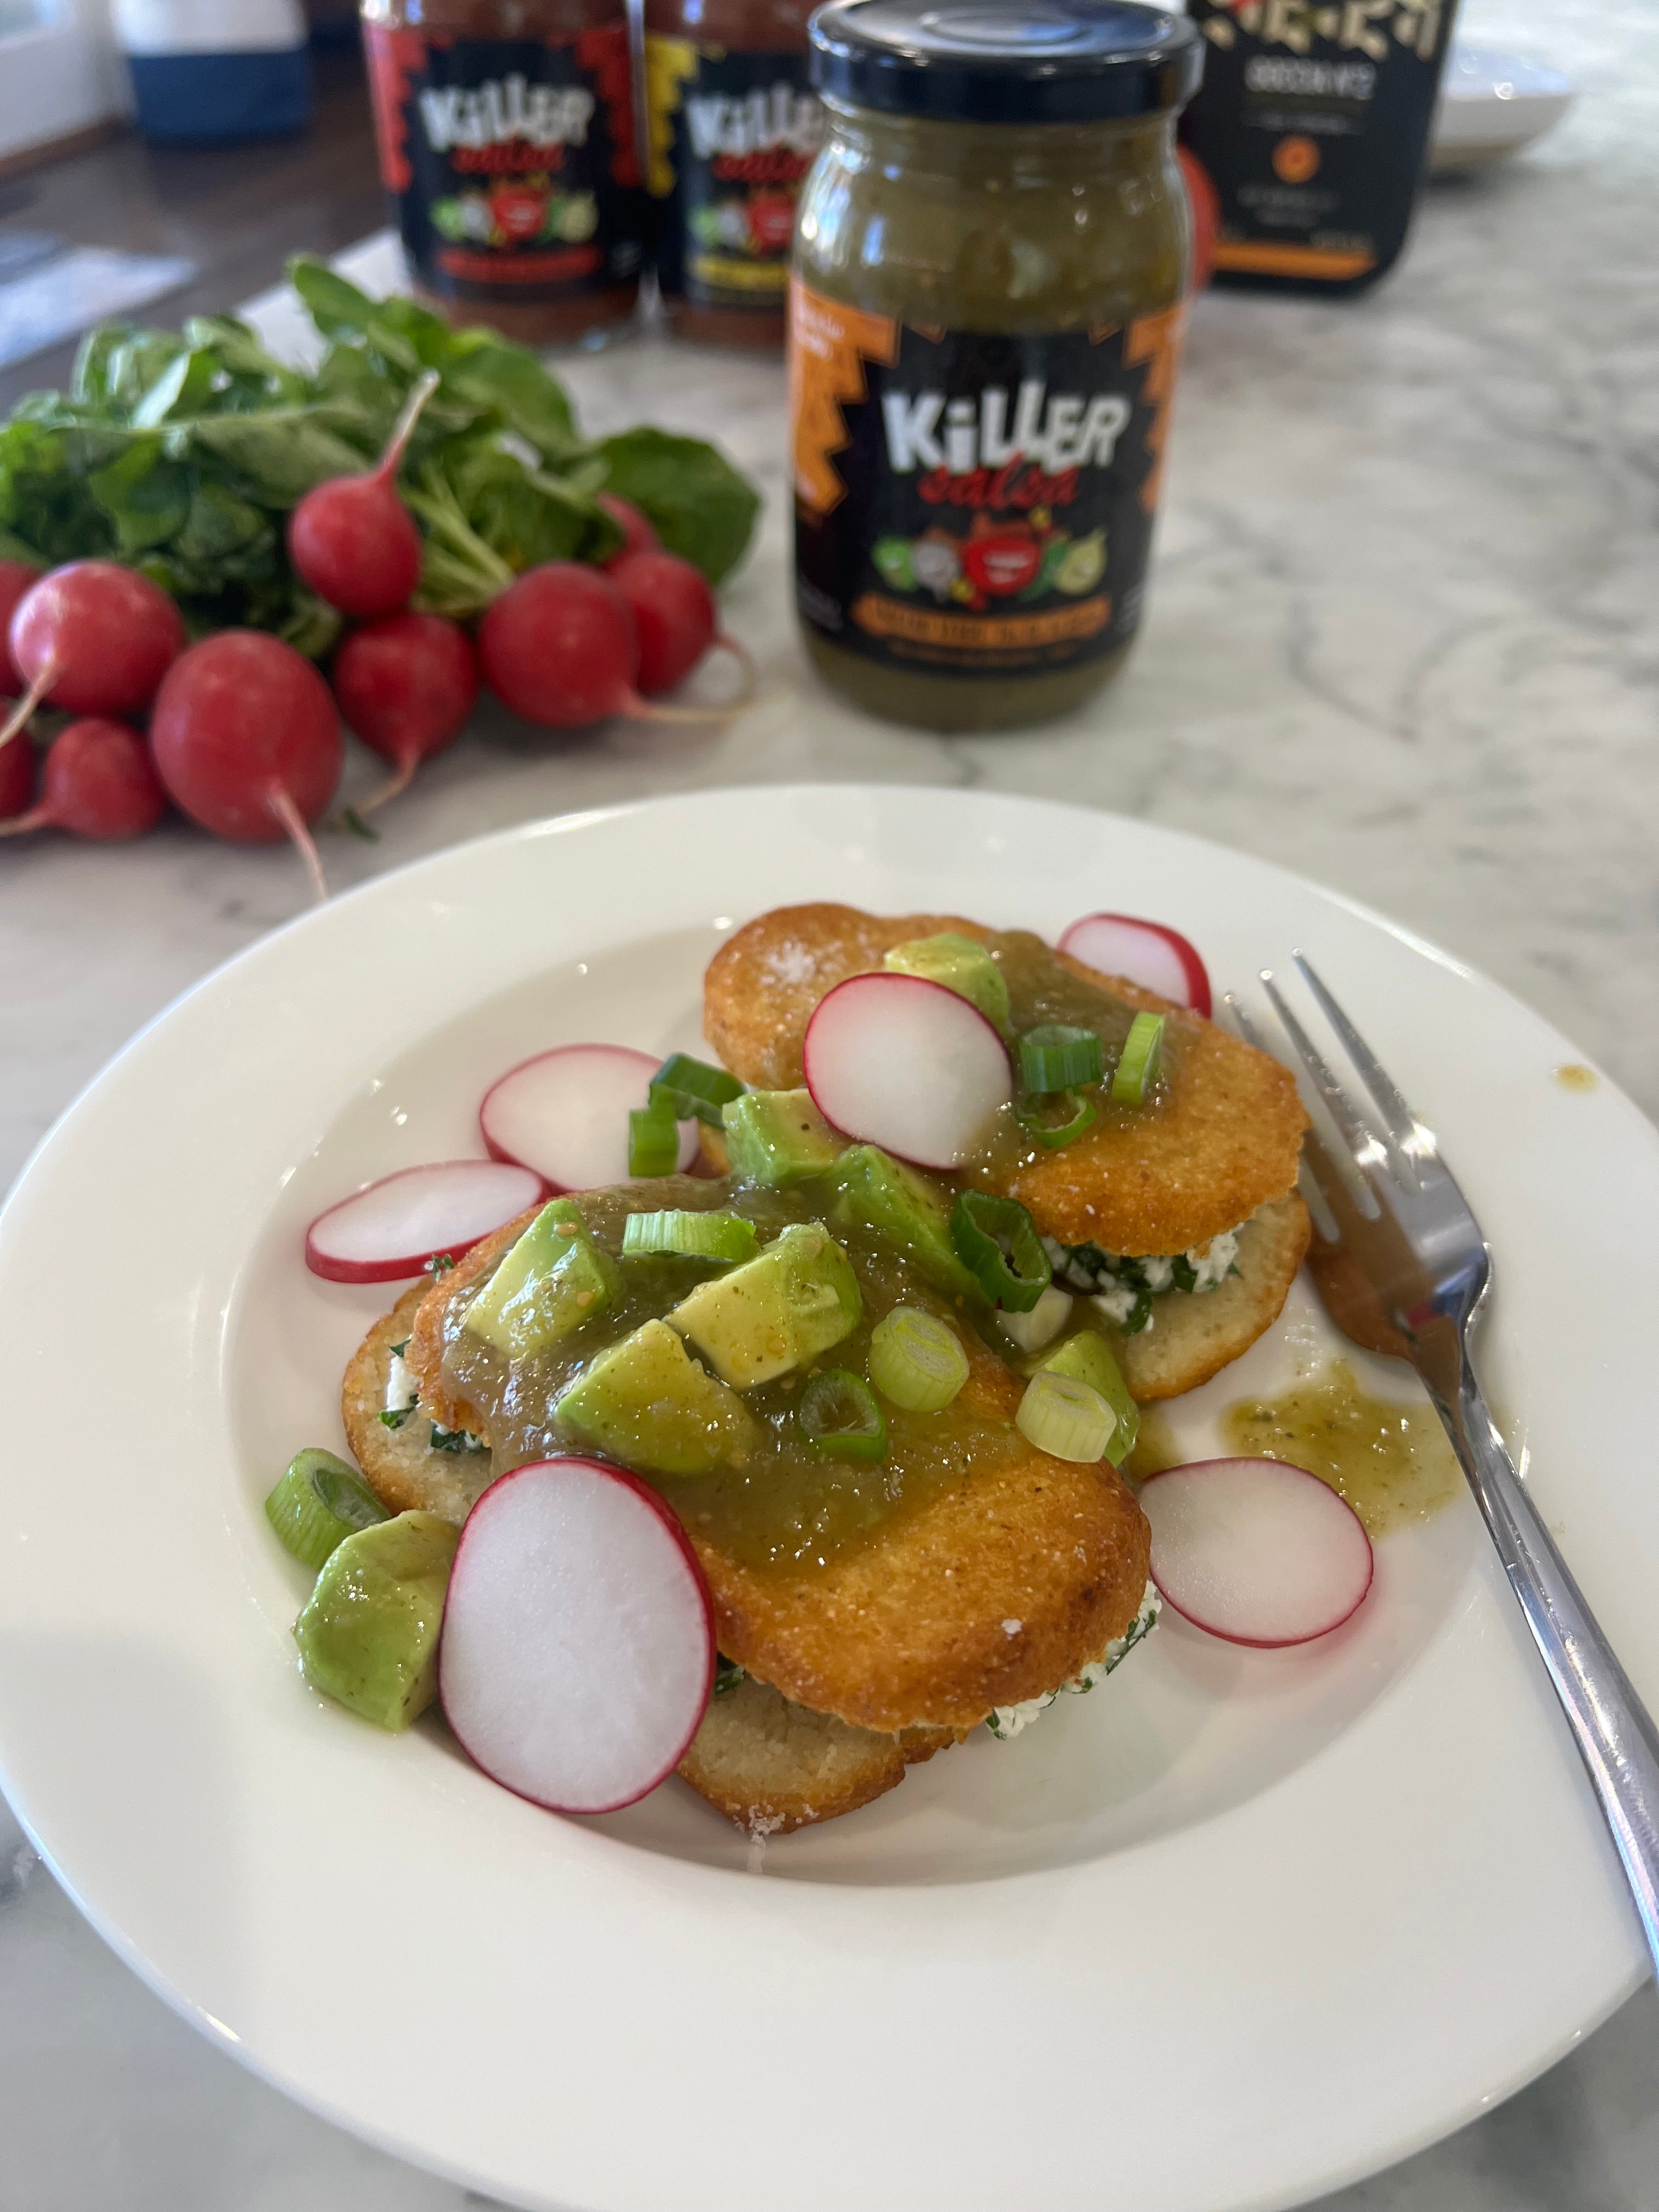 Fried Masa Cakes with Goat Cheese Filling and Avocado Tomatillo Salsa